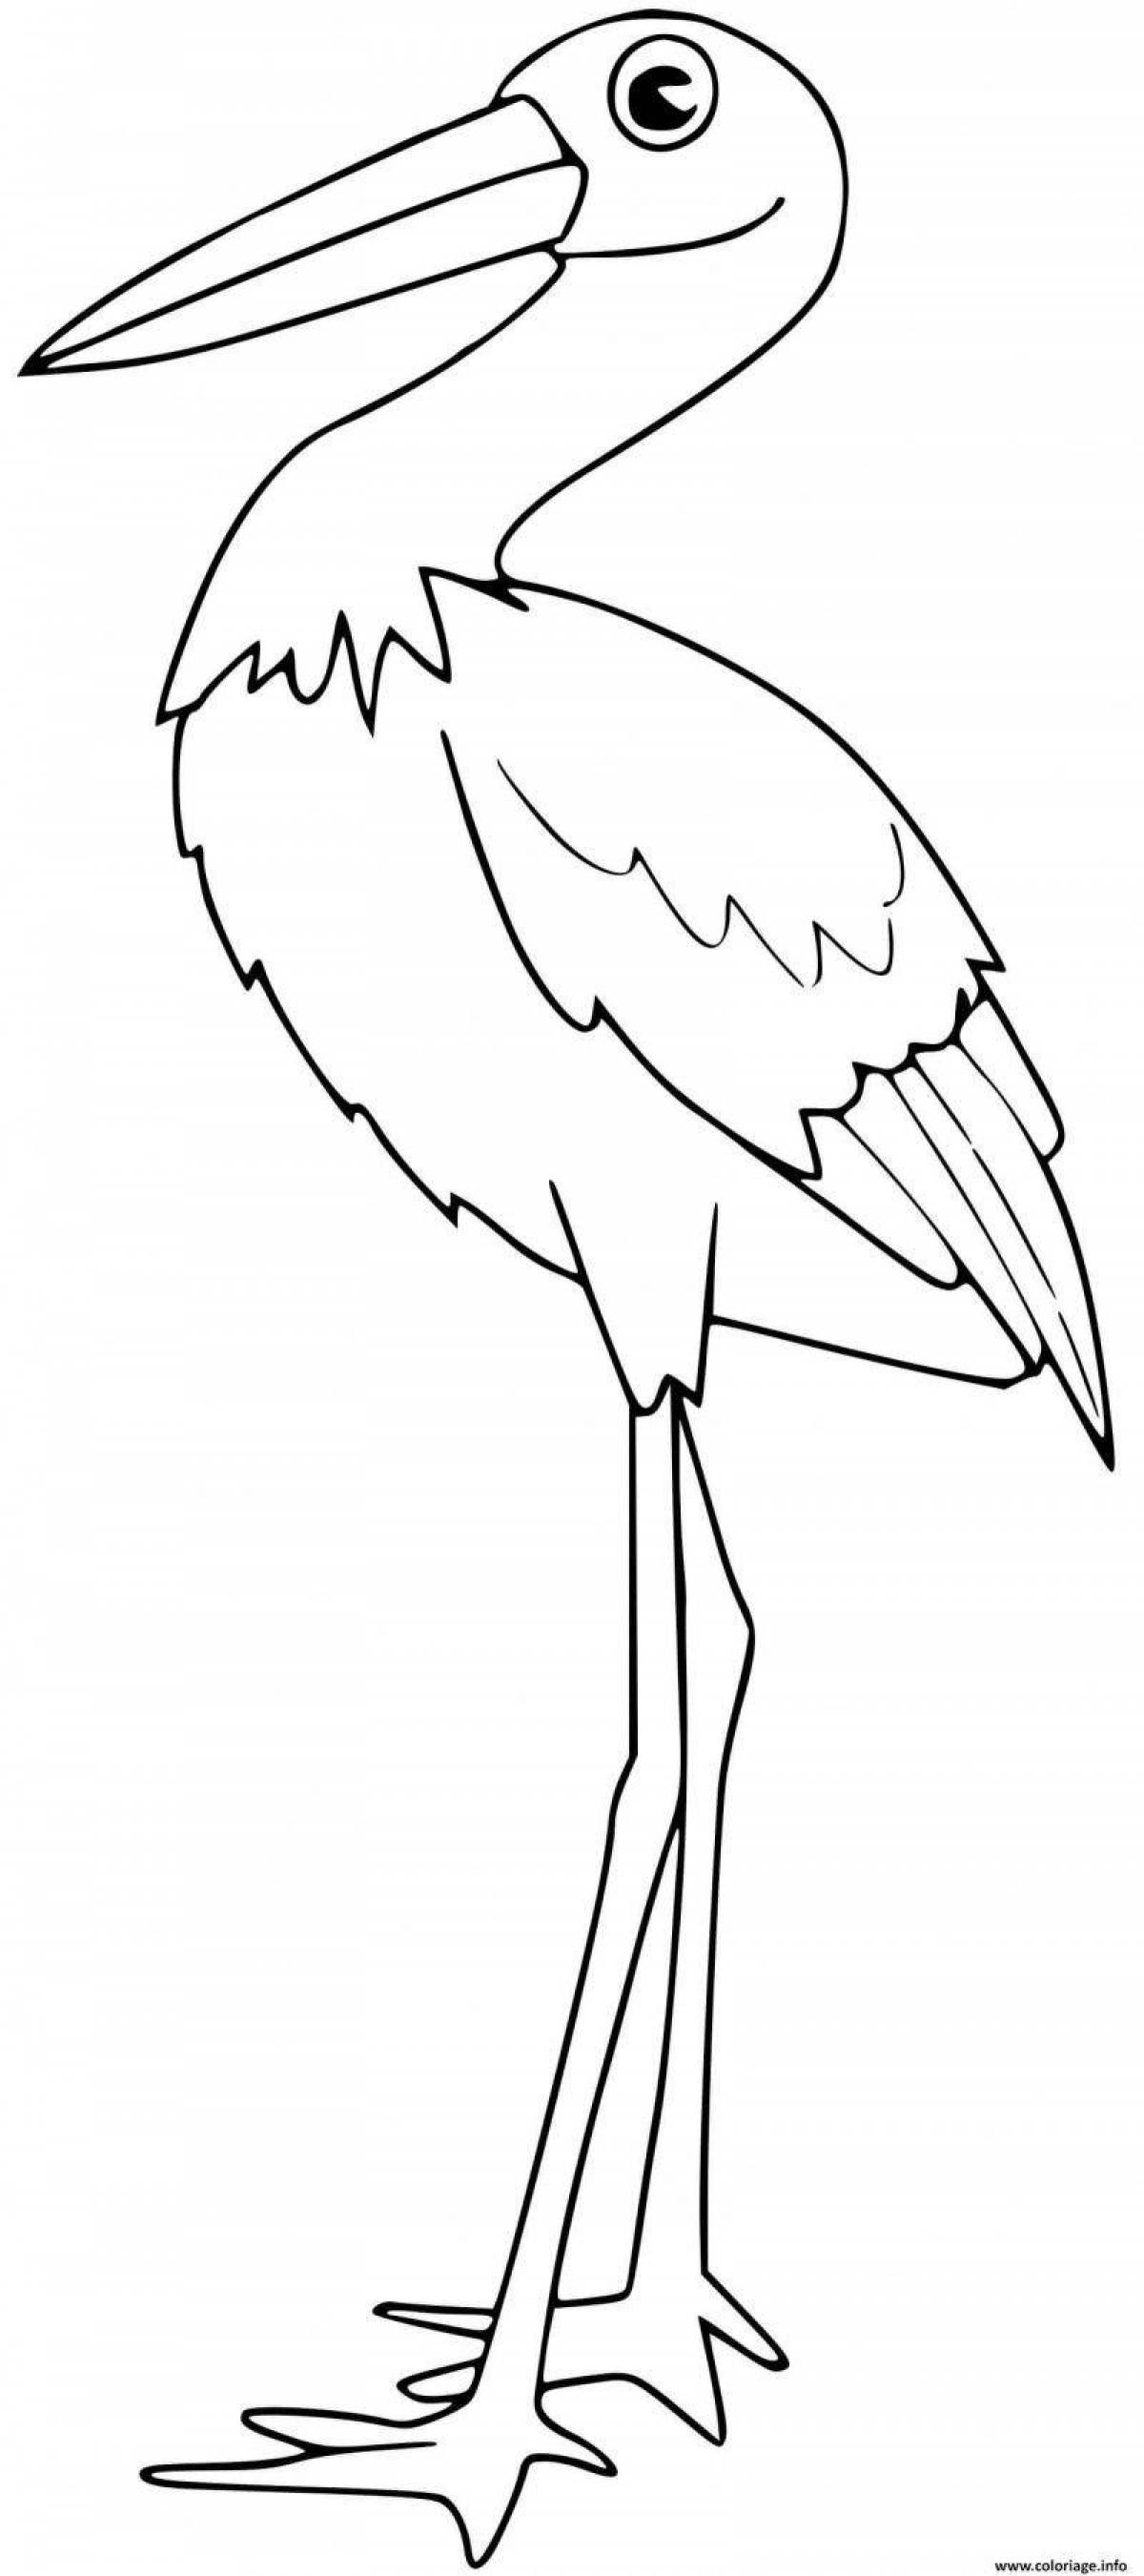 Colouring bright heron for children